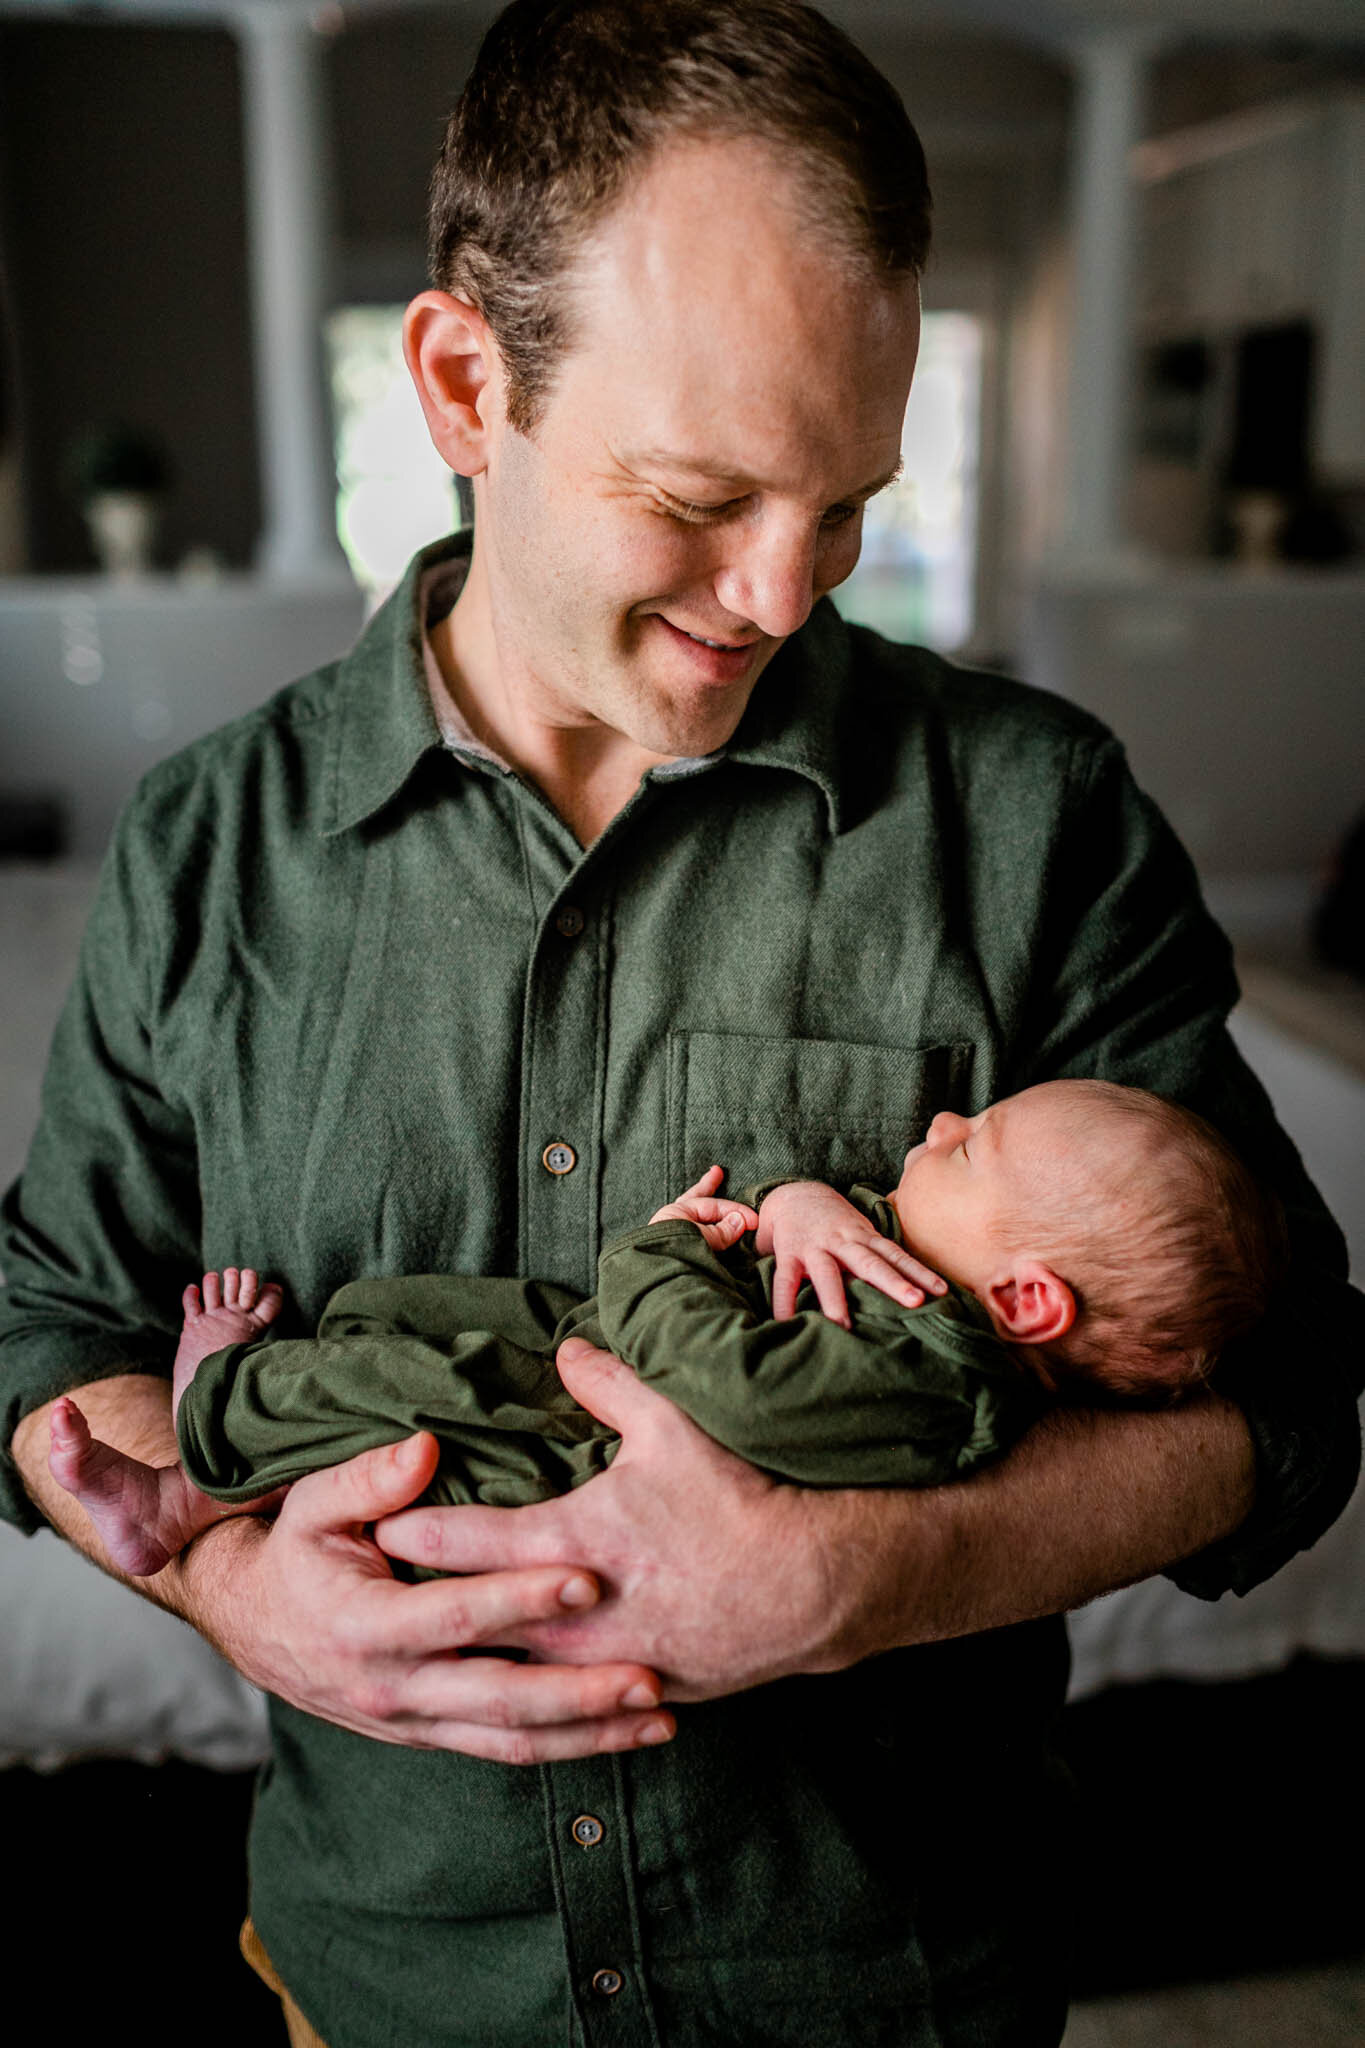 Raleigh Newborn Photographer | By G. Lin Photography | Father looking at baby boy in his arms